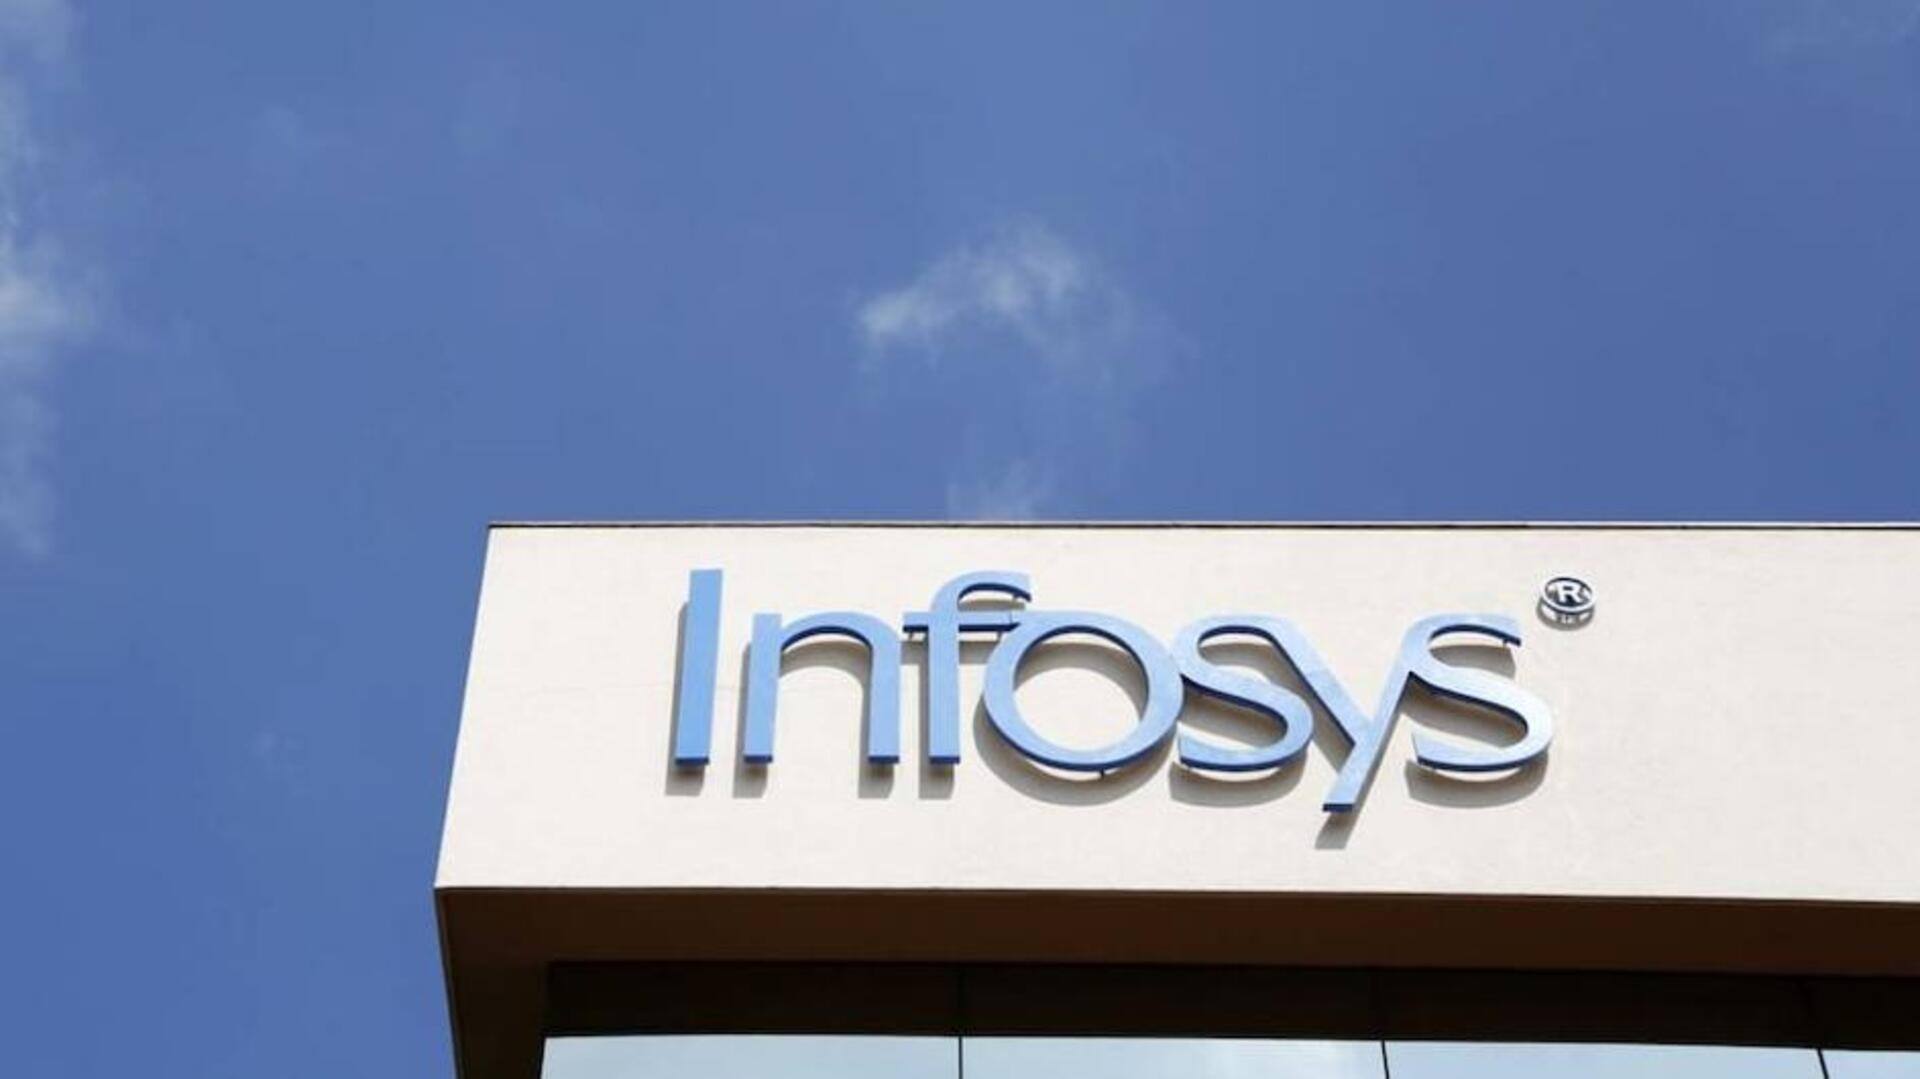 Infosys headcount declines for third consecutive quarter to 3.29 lakh